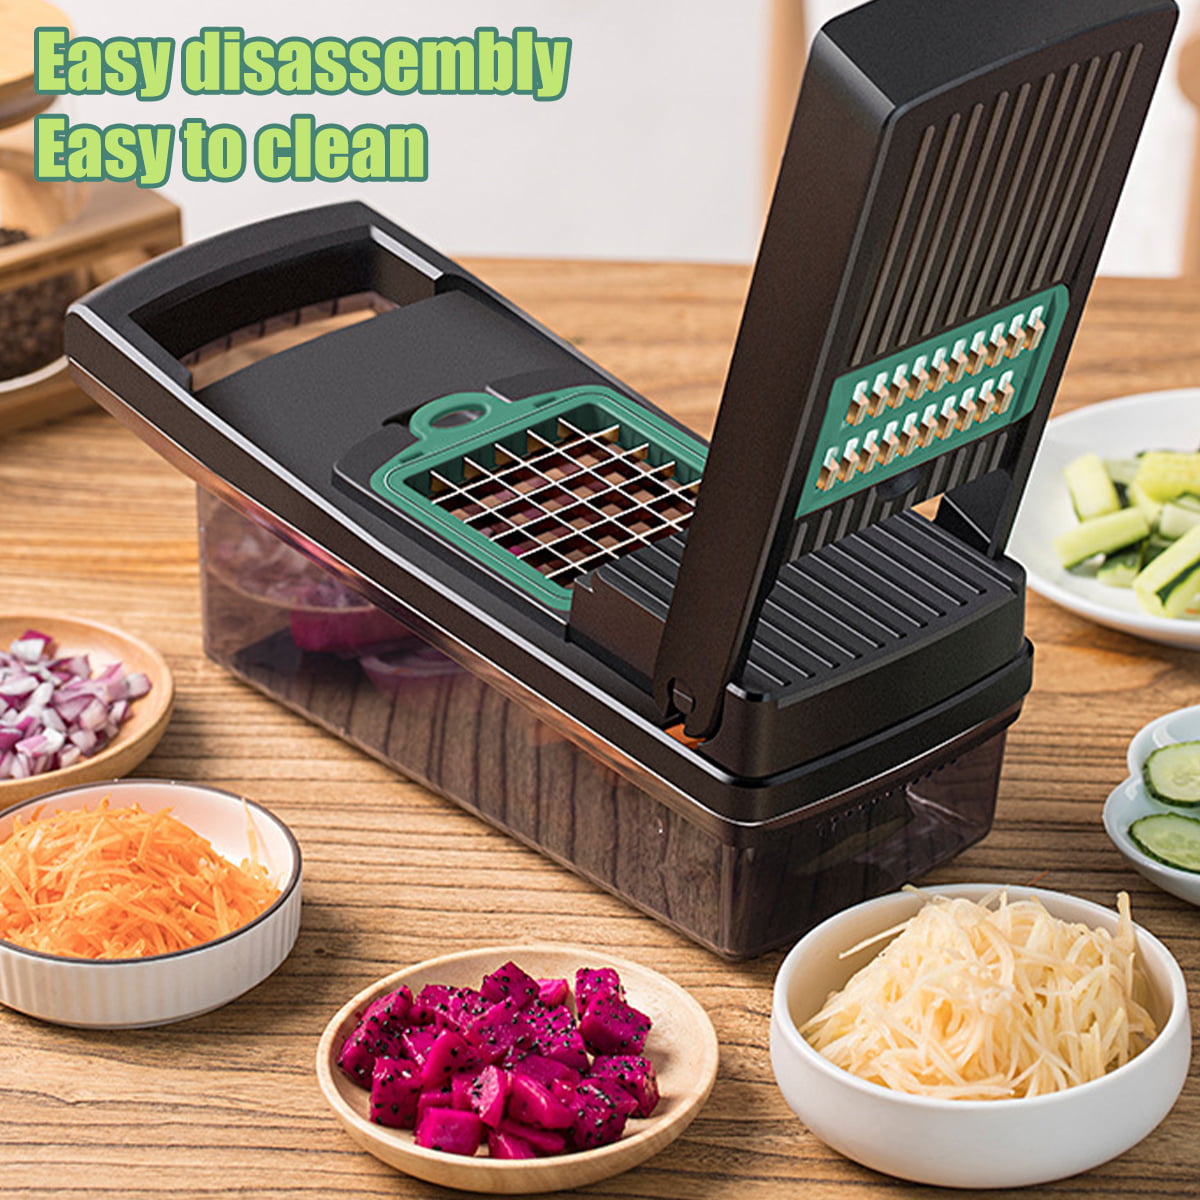 CNKOO Food Chopper, Manual Handheld Kitchen Slicer with Stainless Steel  ZigZag Blade-One Piece Salad Vegetable Chopper and Slicer-Manual Mini Hand